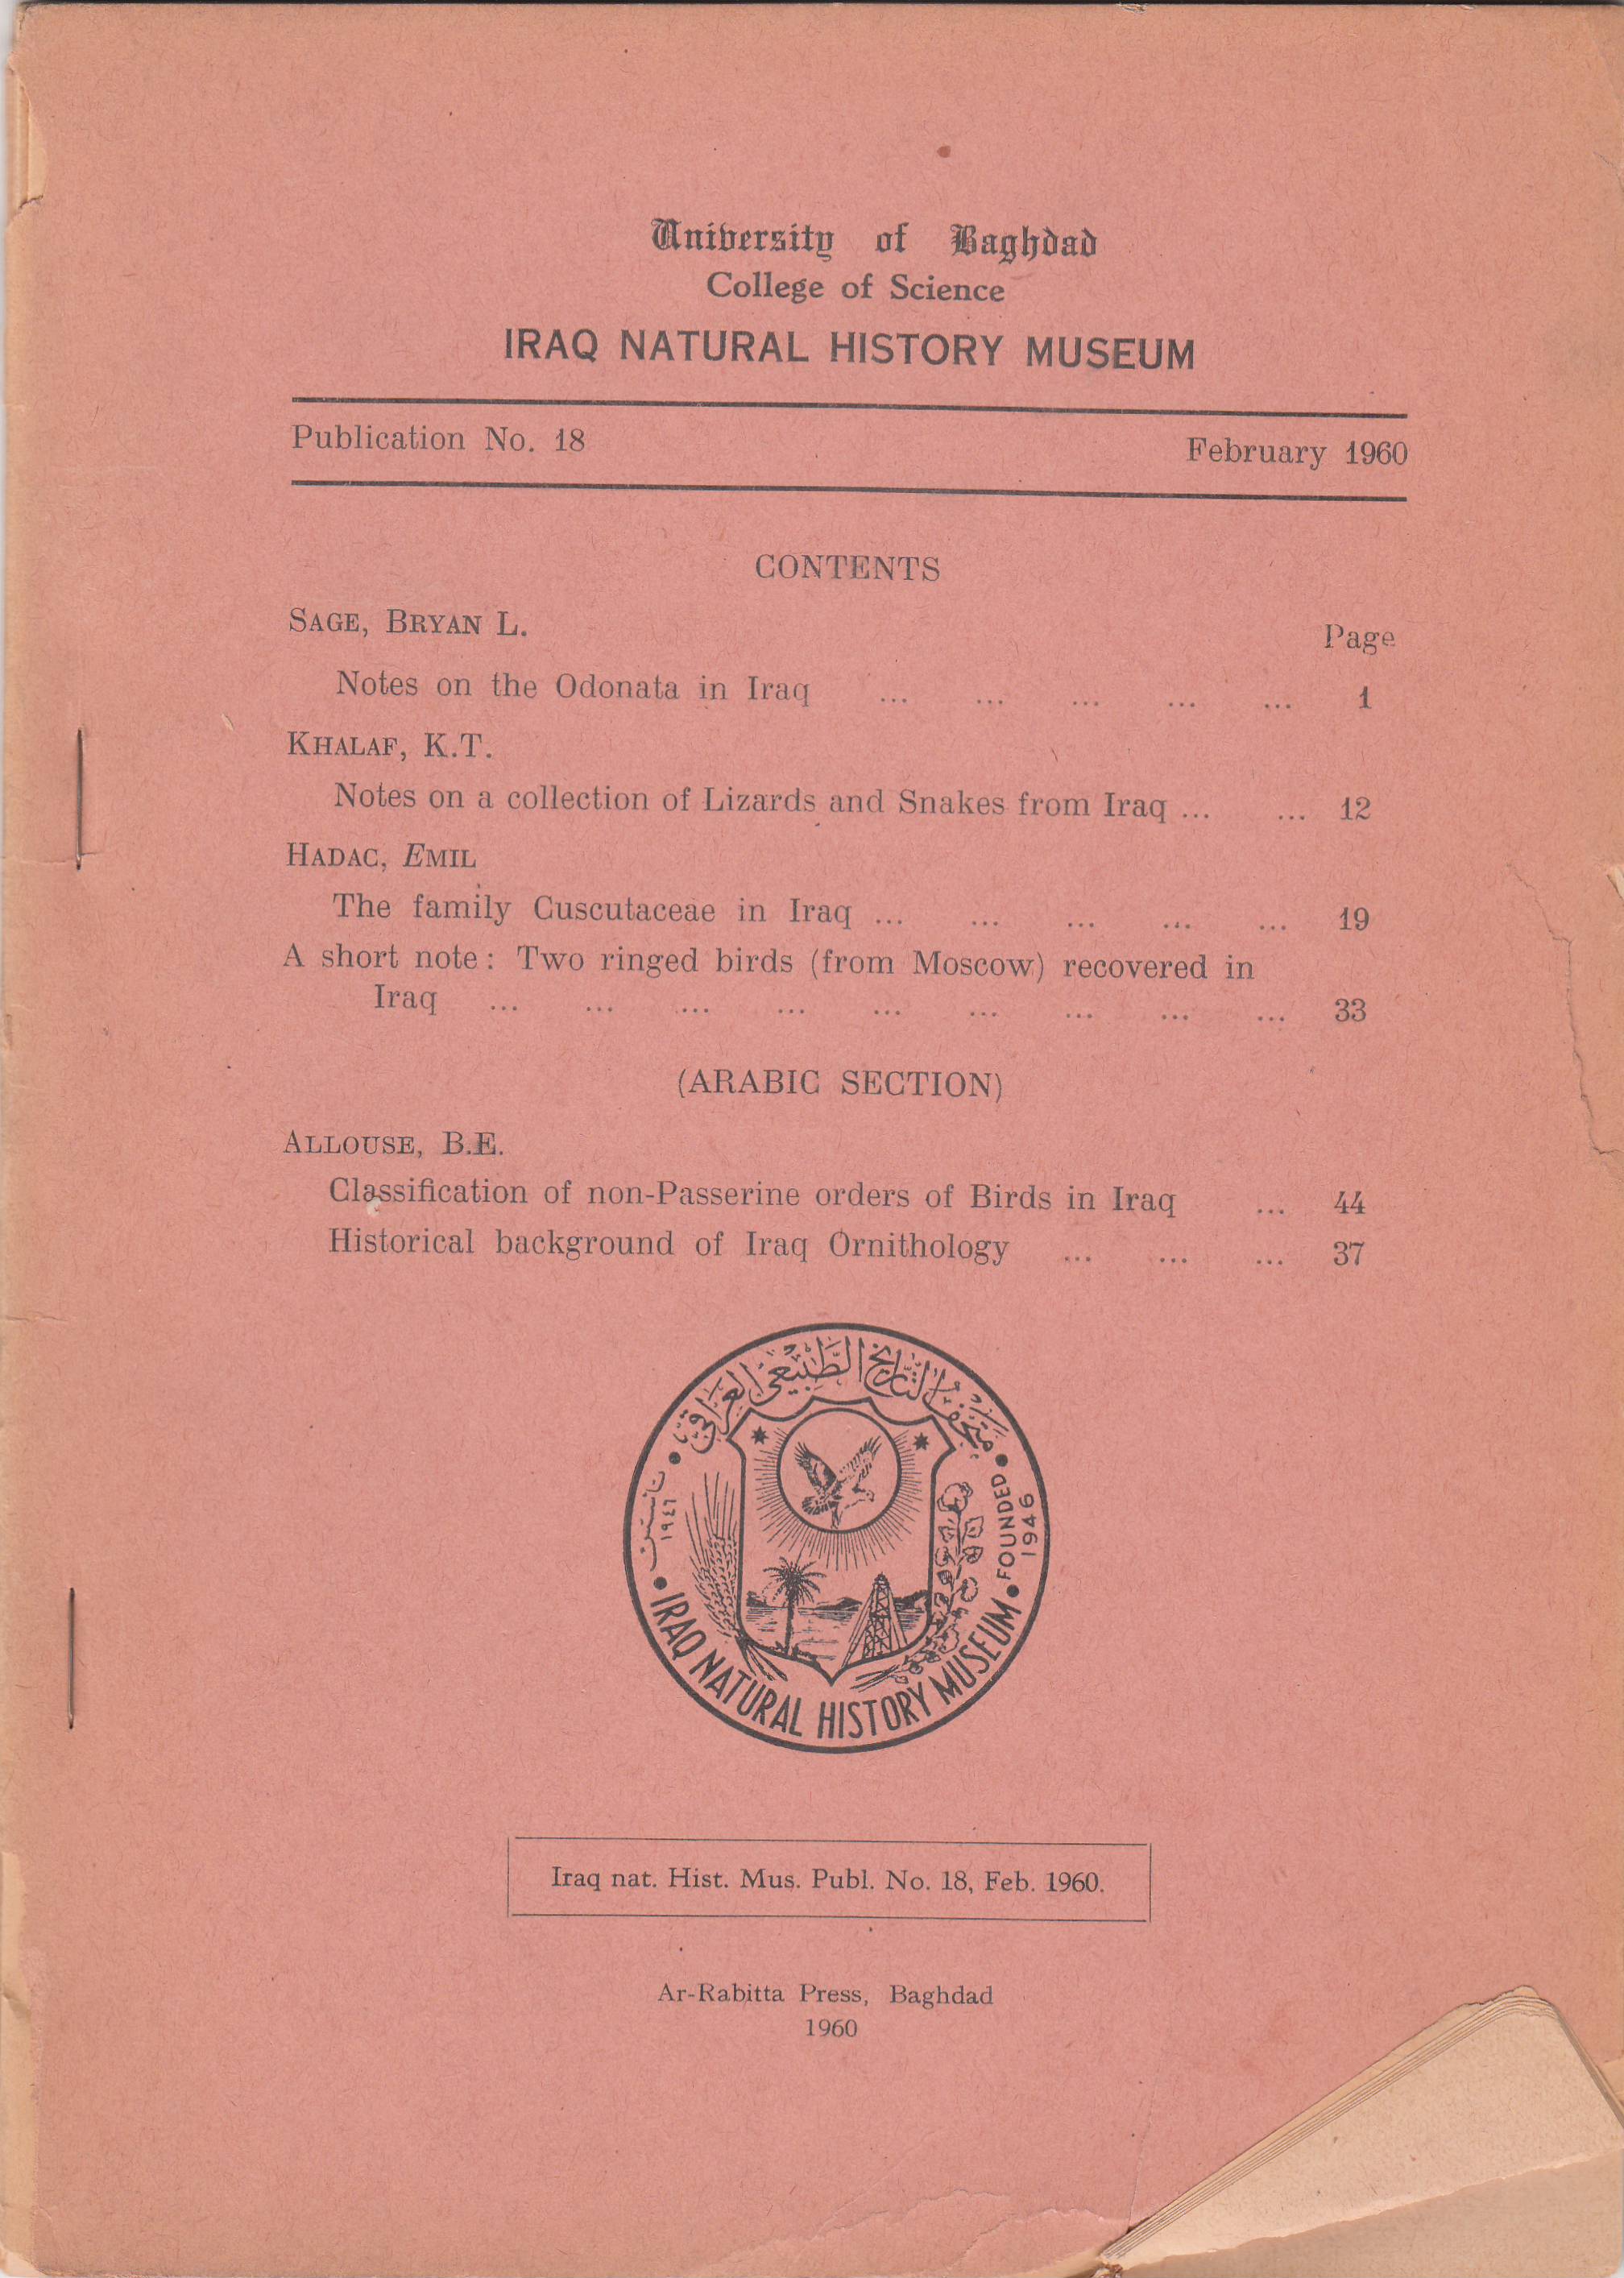 					View No. 18 (1960): Classification of non-Passerine orders of Birds in Iraq  (ARABIC SECTION) by LOUSE, B.E. p;44
				